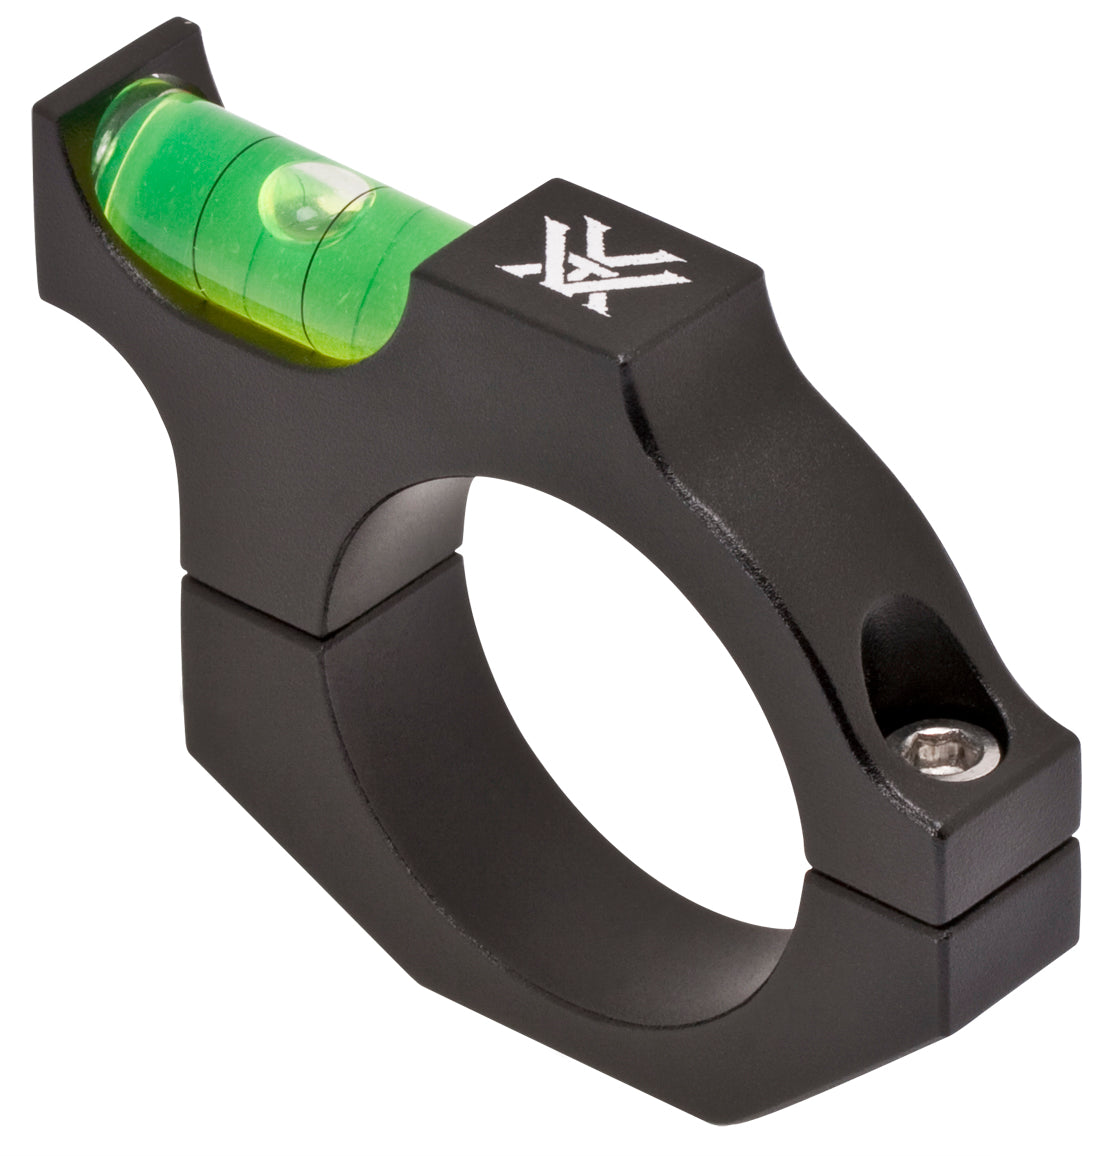 34mm Bubble Level for Riflescope